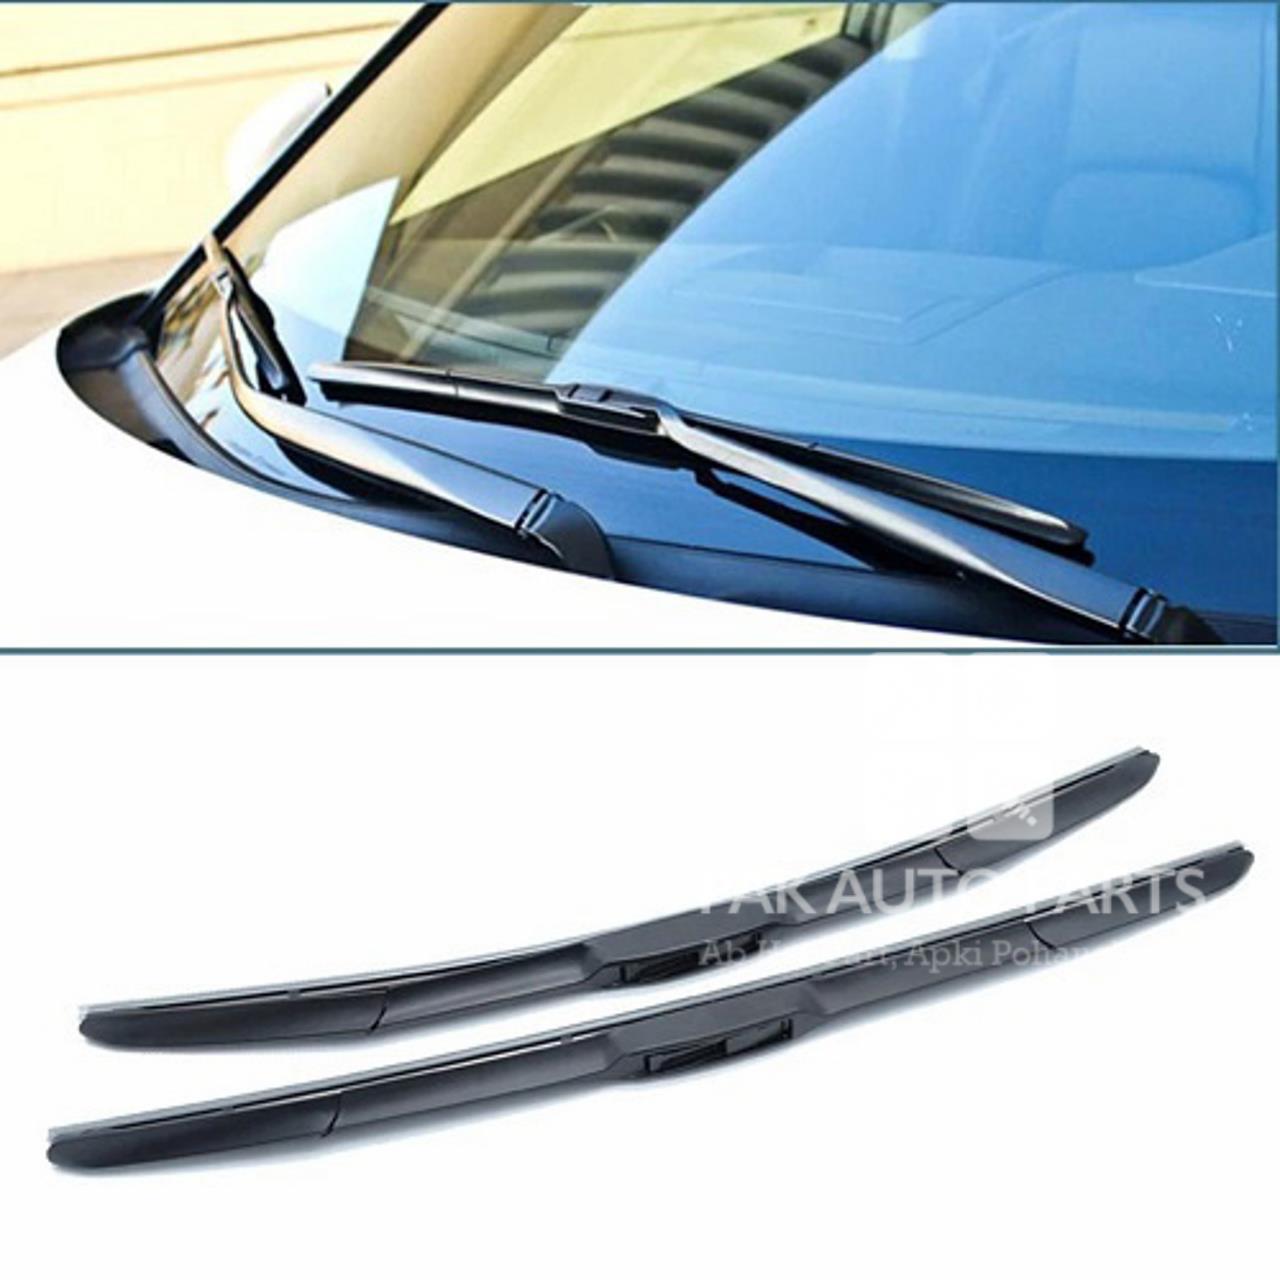 Picture of Toyota Vitz 2002-2014 | Hybrid Wiper Blades | 14+24 Inches | Non-Scratch able | Black Lead Coated Rubber.